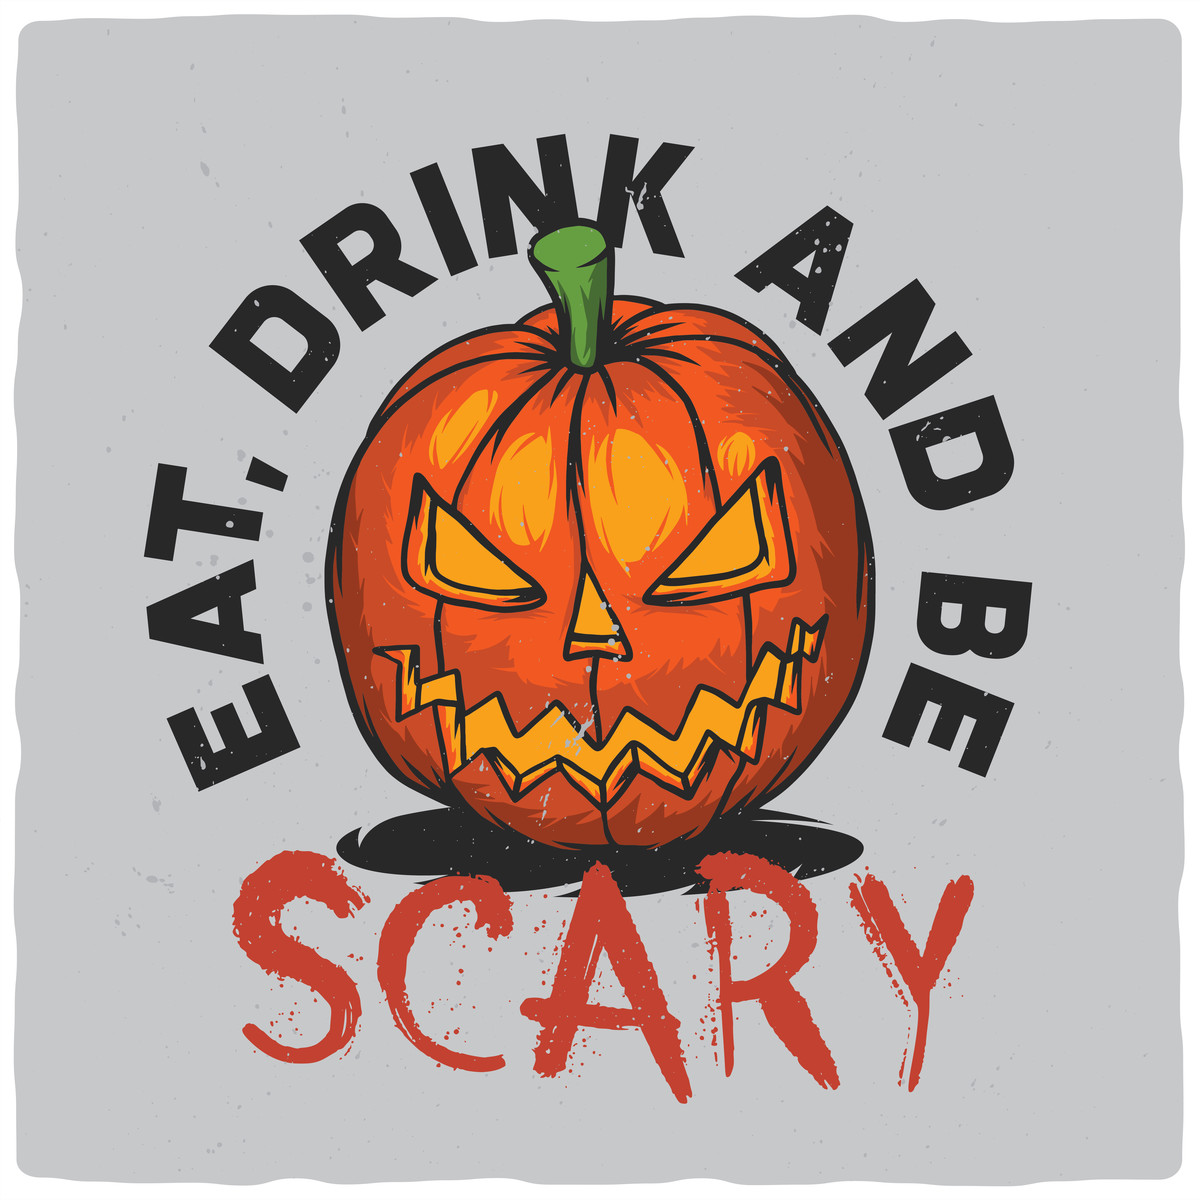 Halloween jack o'lantern with motto "eat, drink and be scary"